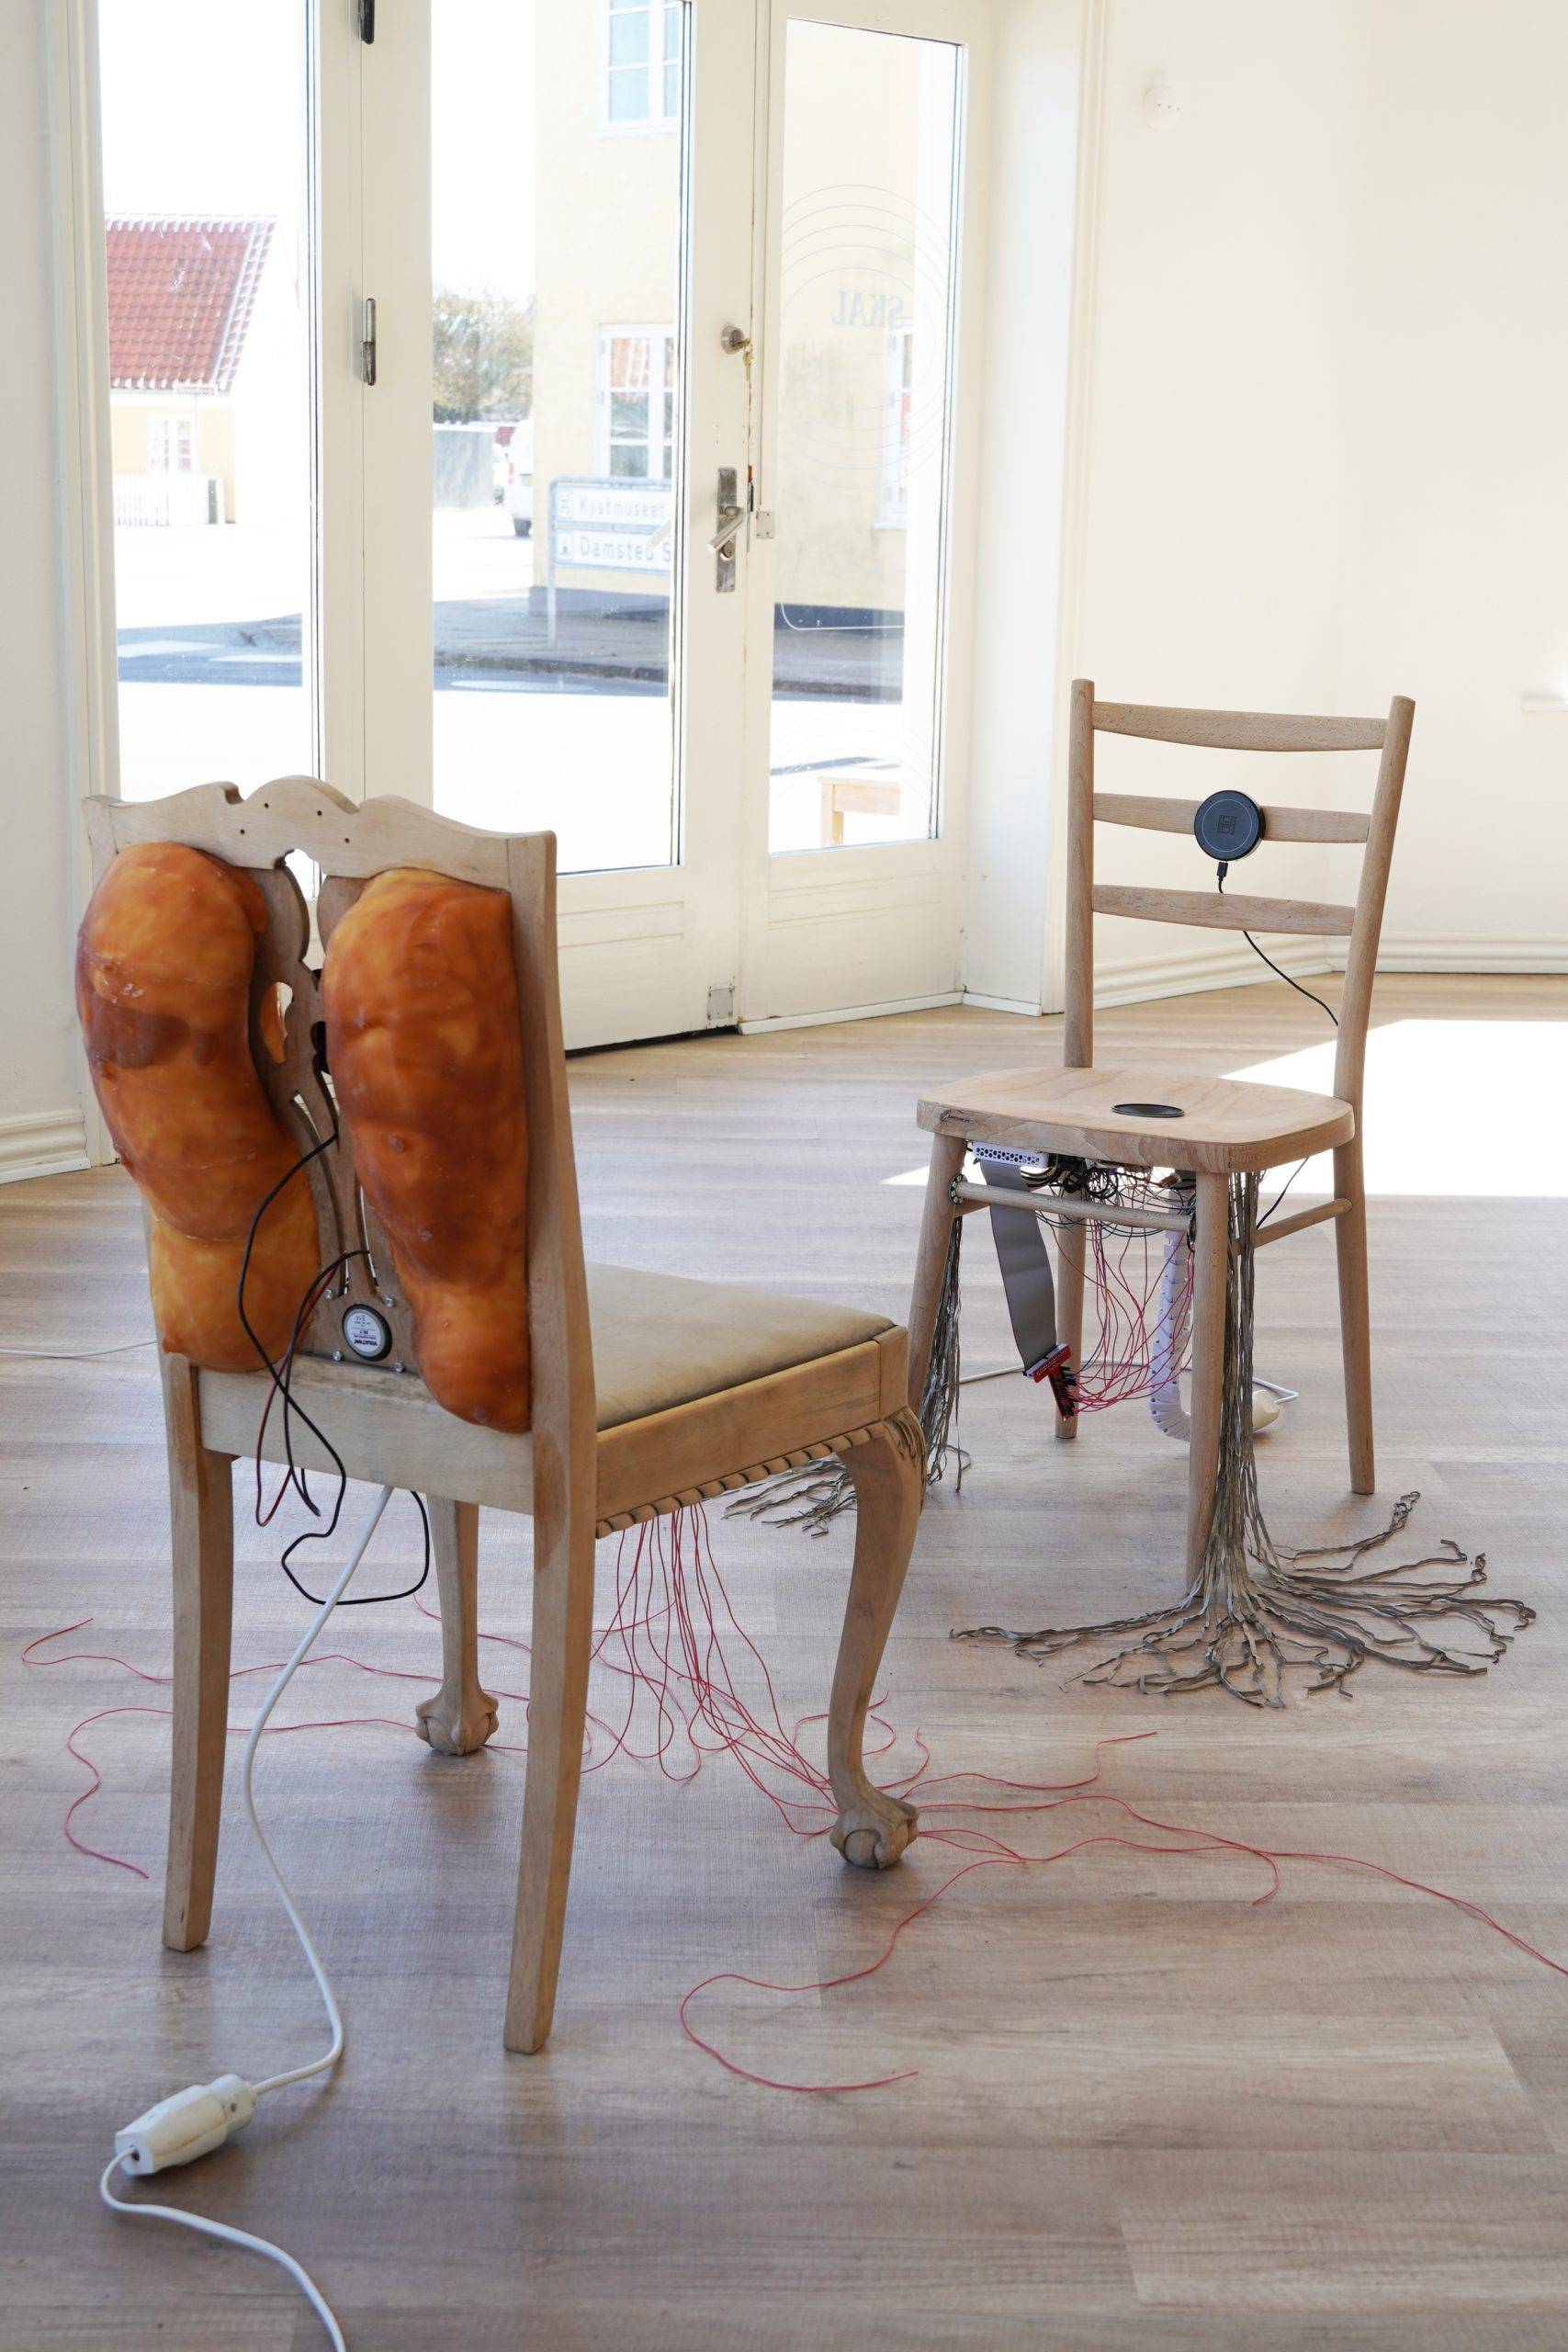 Sculptural chairs conversing about consciousness at SKAL Contemporary